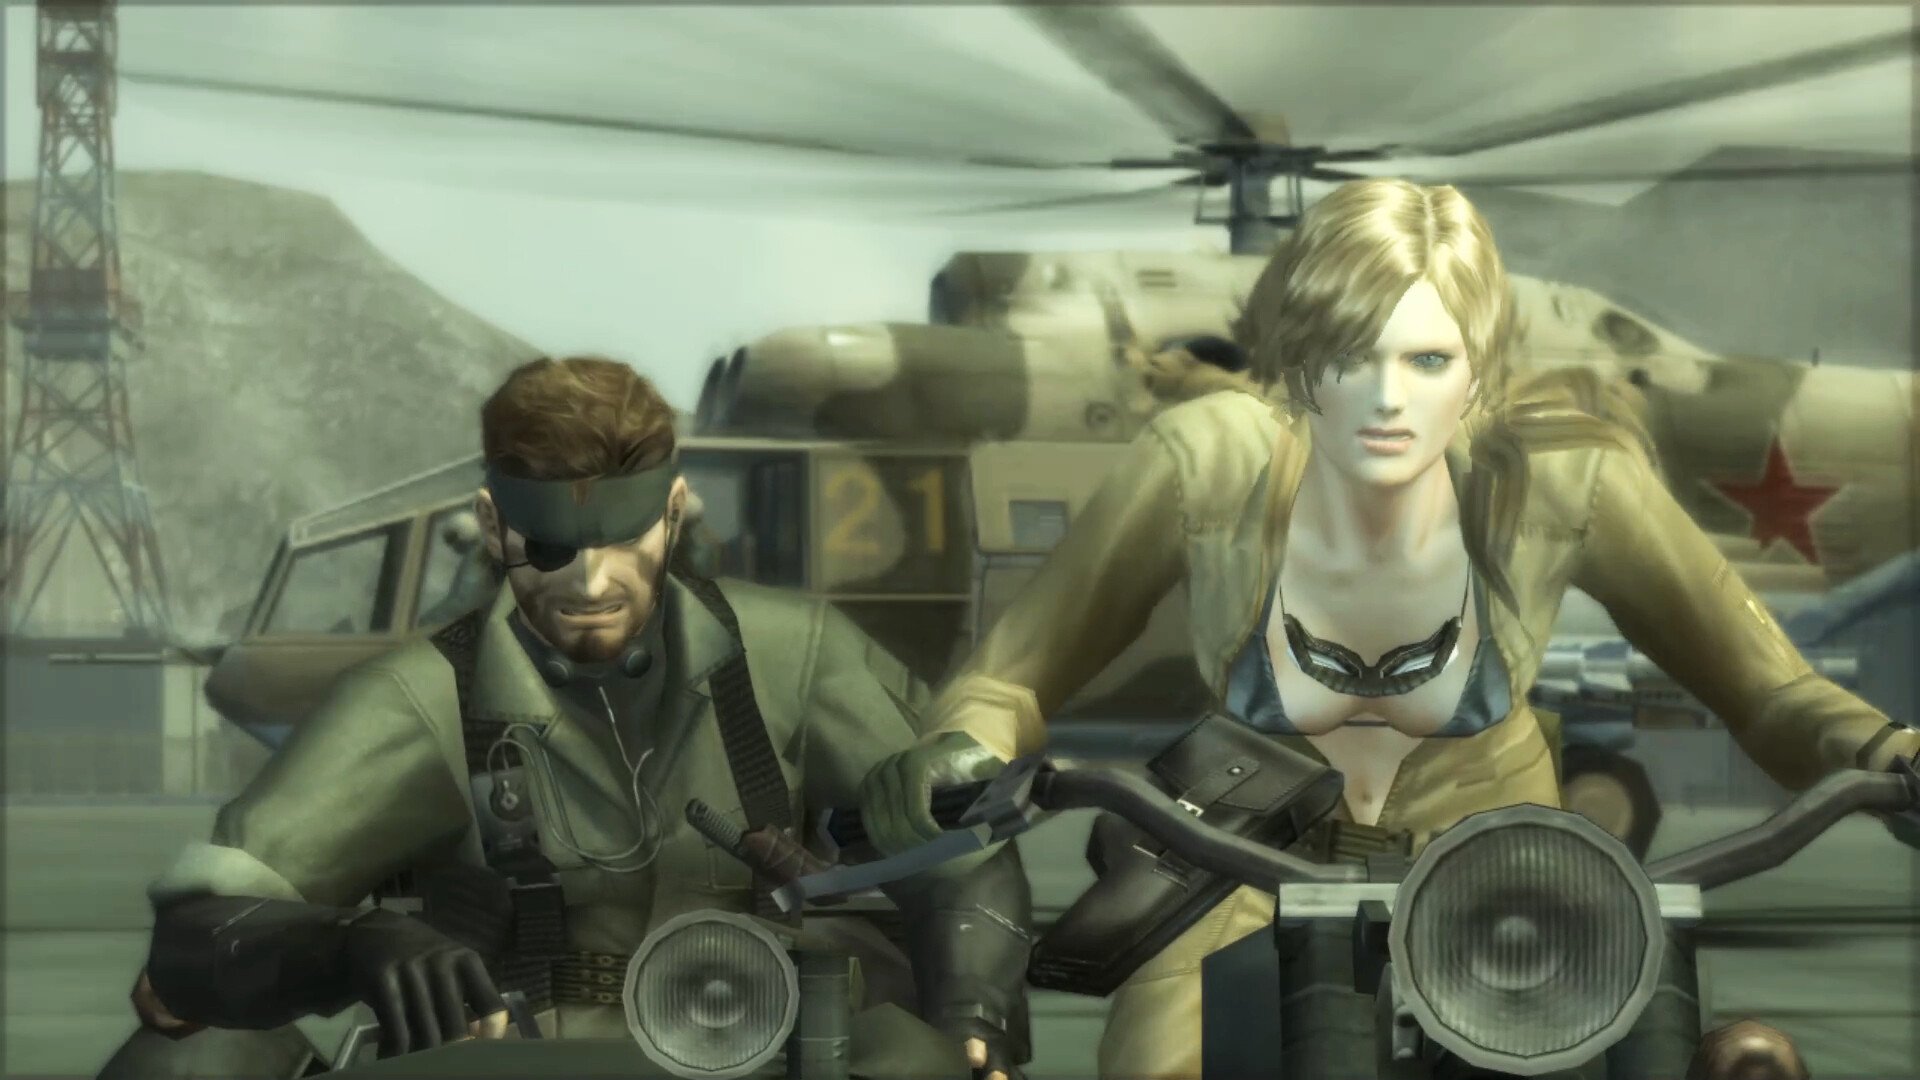 METAL GEAR SOLID 3 Snake Eater Master Collection Version 4